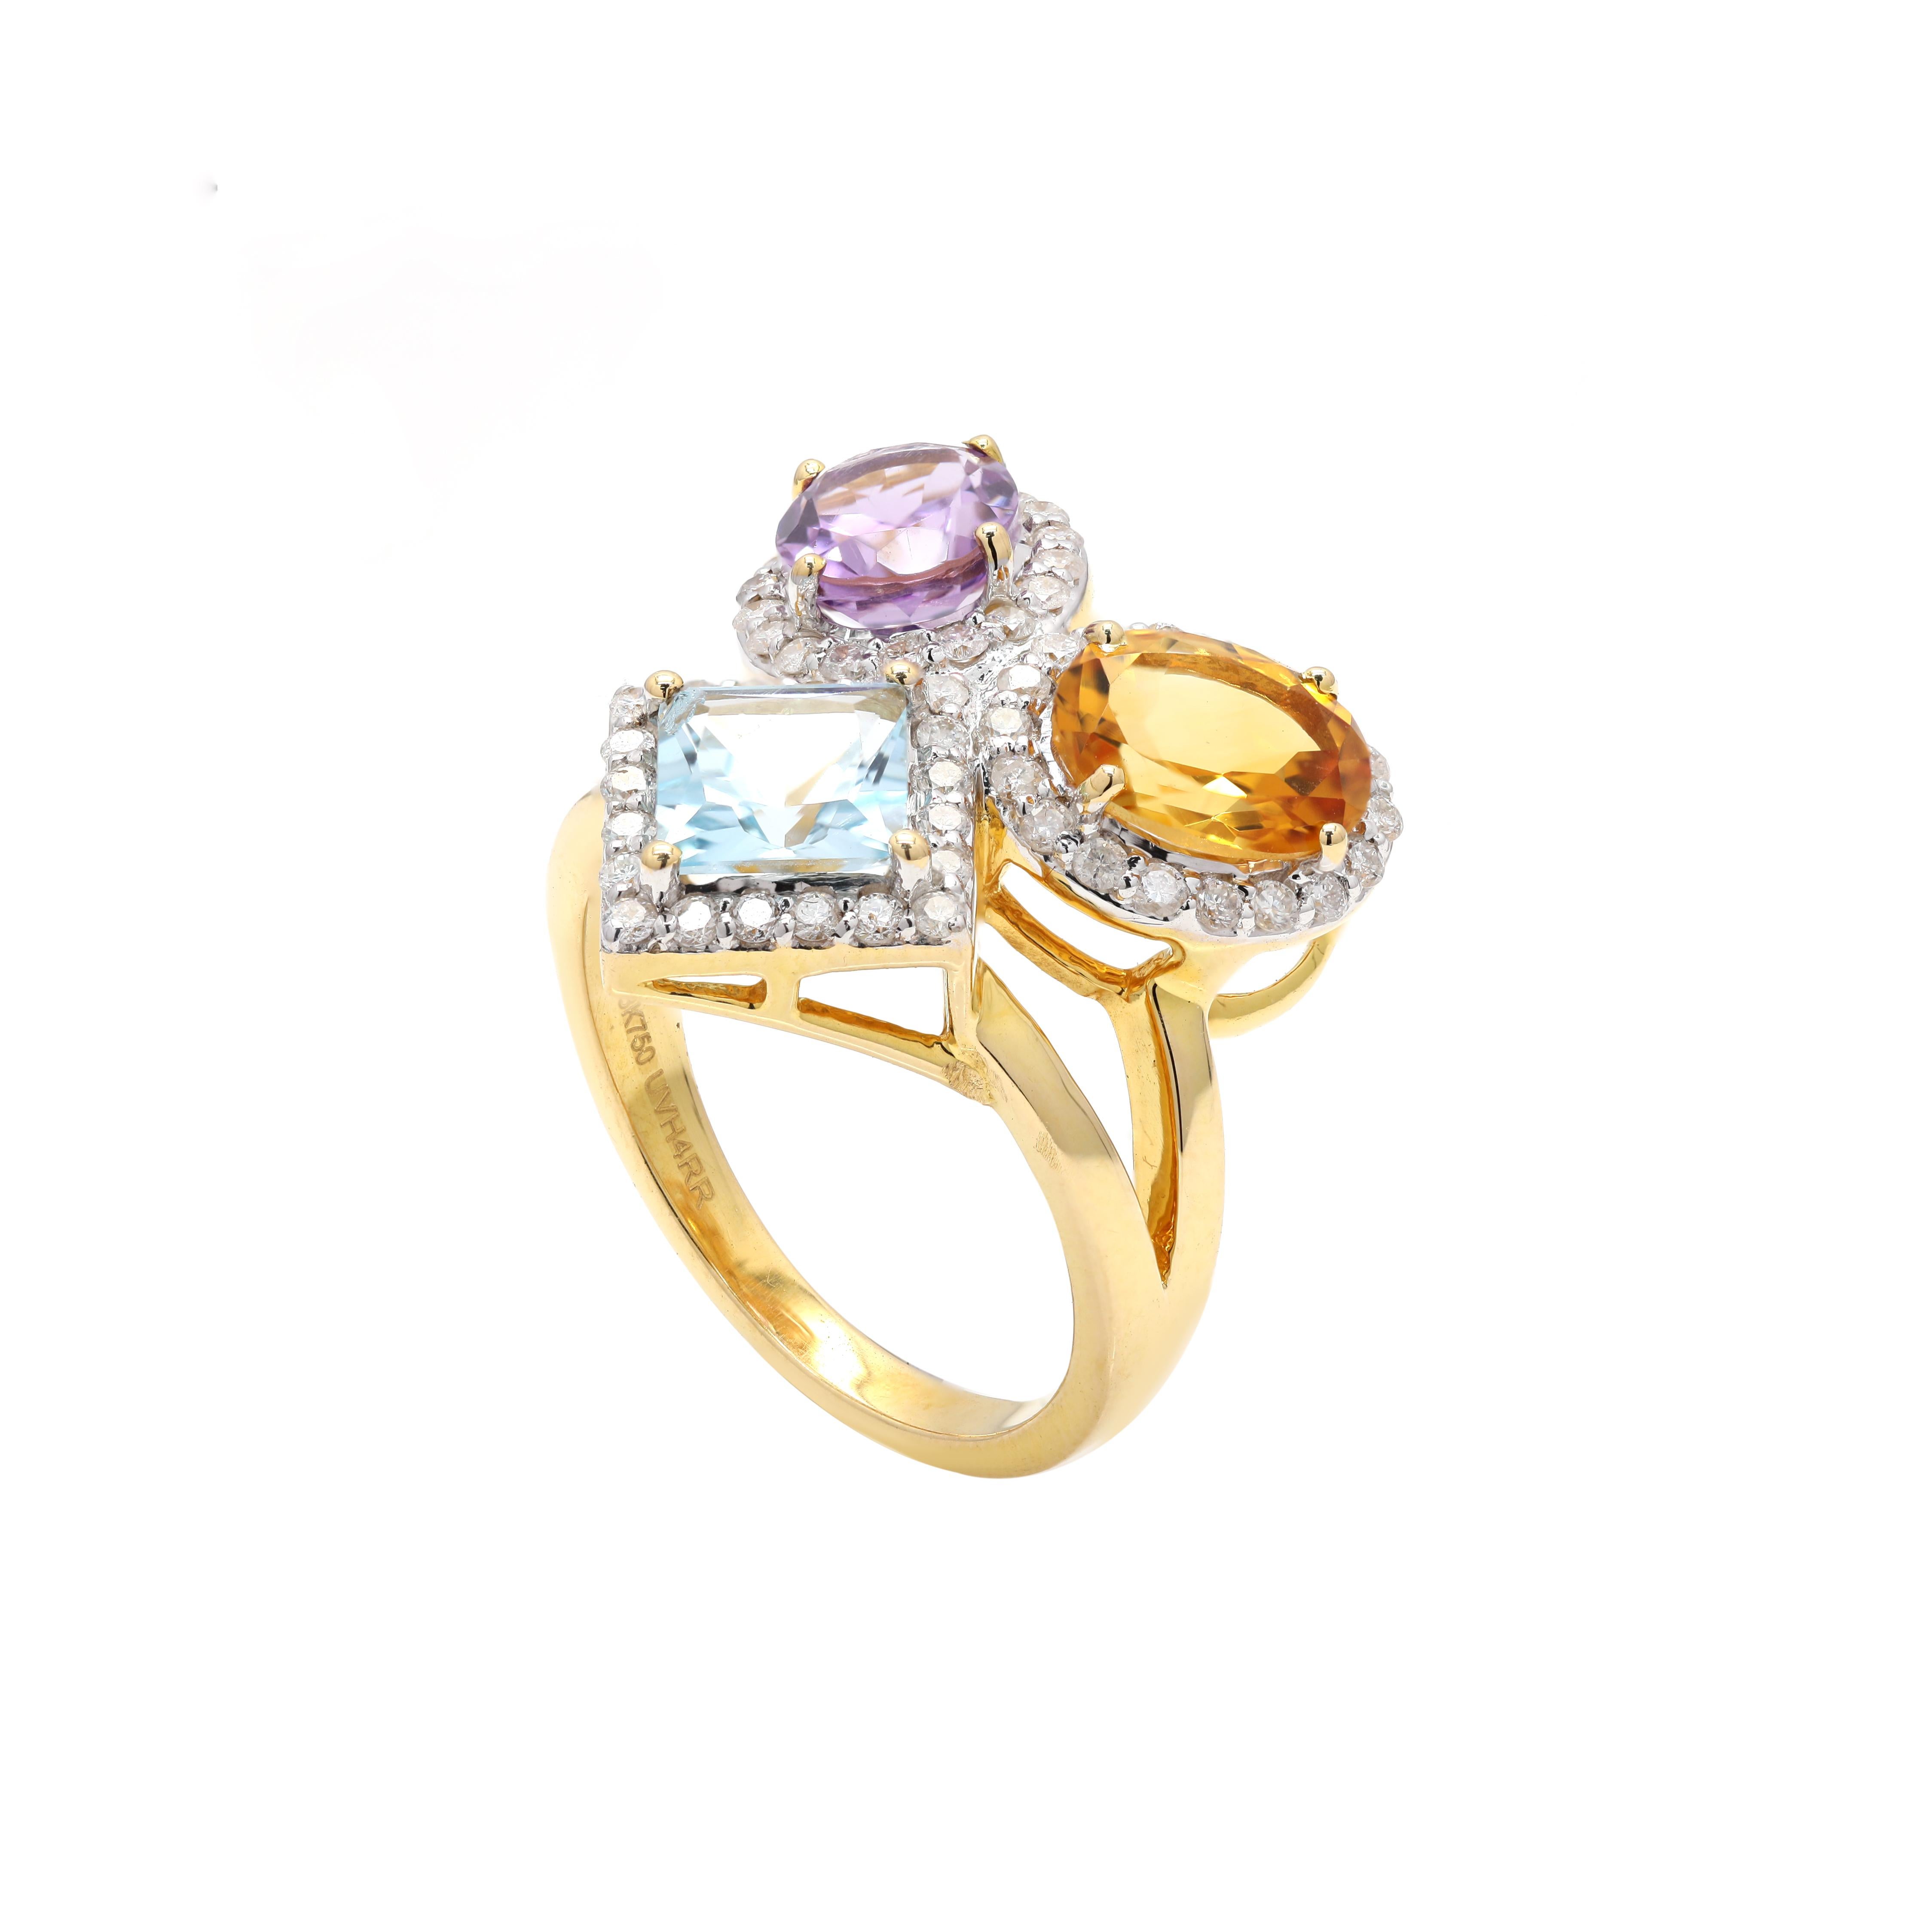 For Sale:  Statement 7.23ct Semi Precious Cocktail Ring in 18k Yellow Gold with Diamonds 4